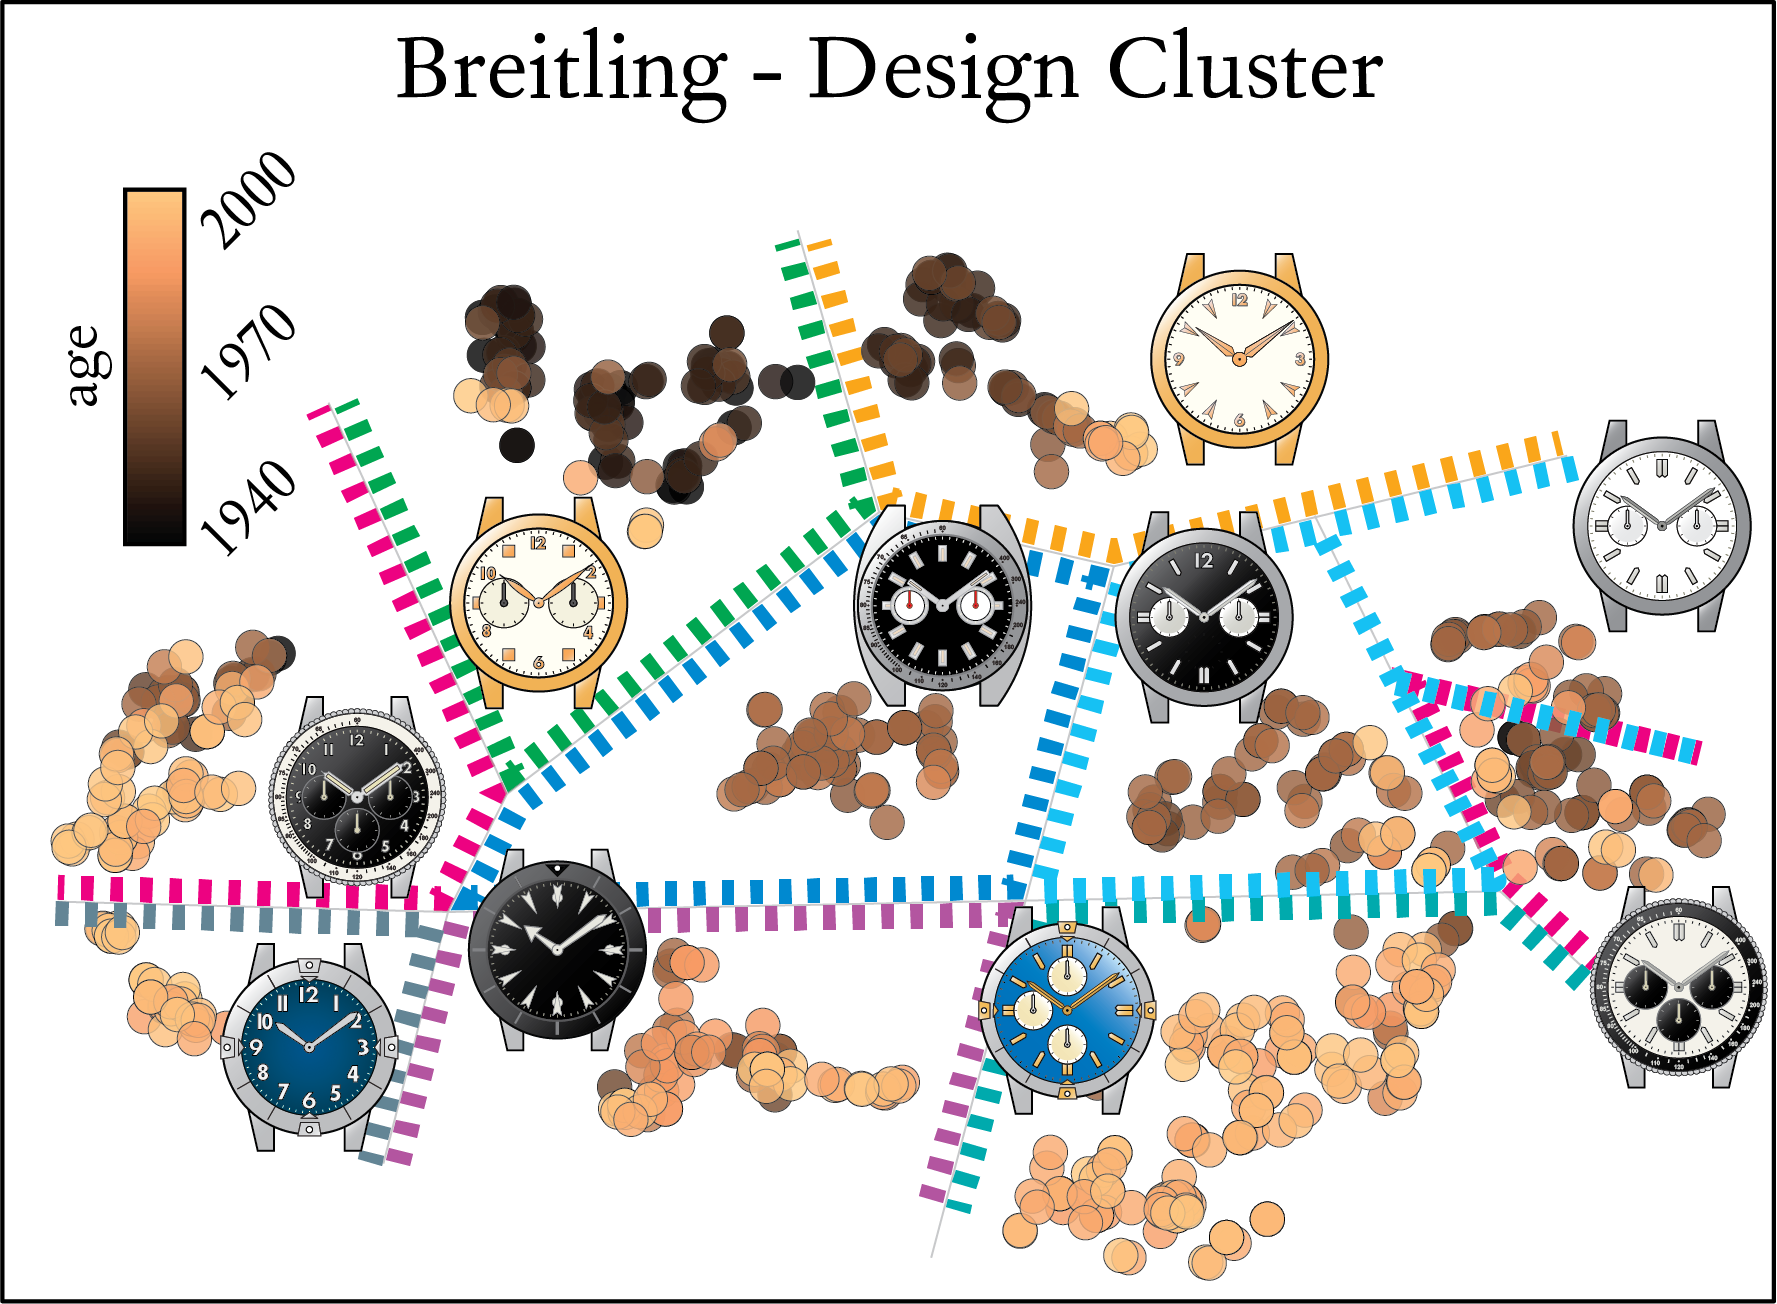 Design Cluster of all Breitling vintage watches from 1940-2000